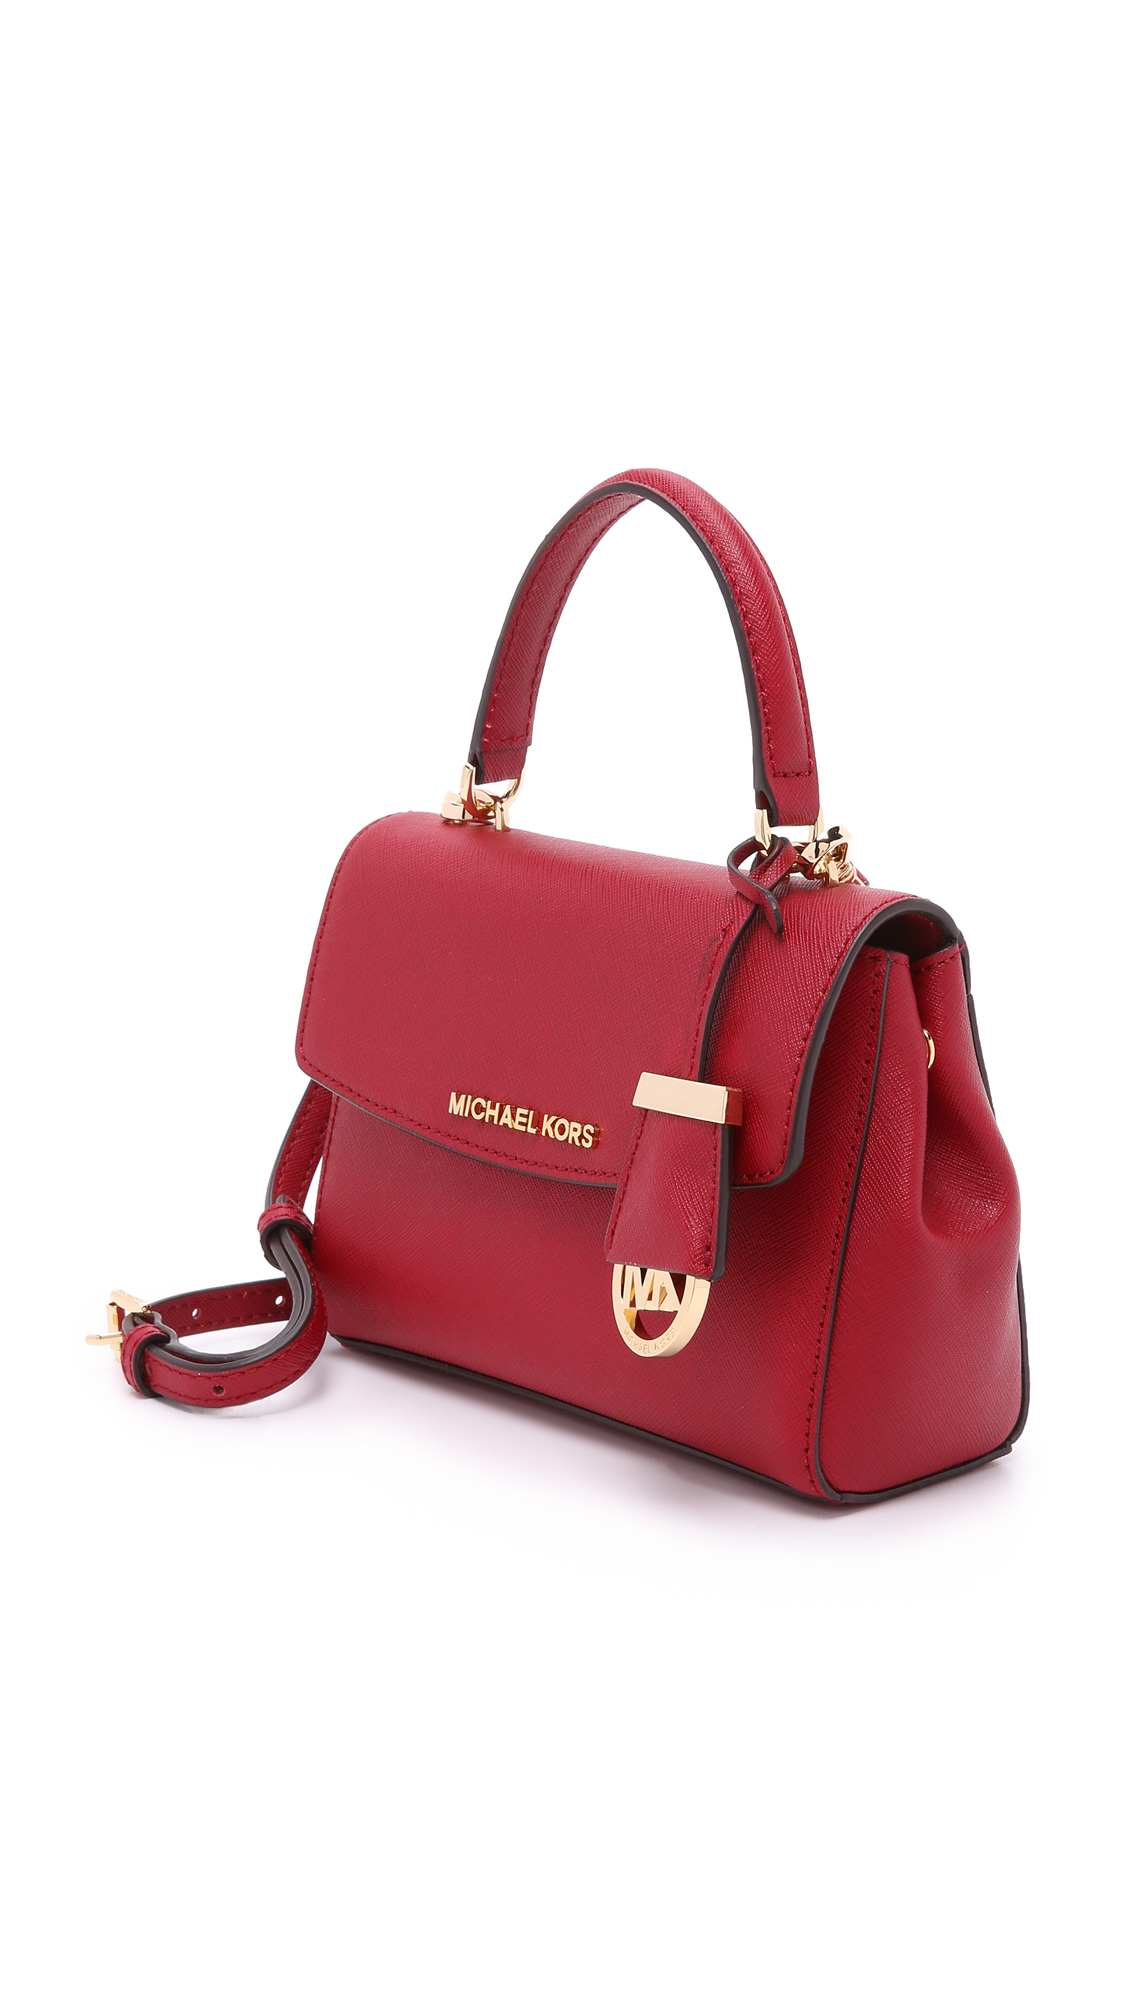 MICHAEL Michael Kors Ava Extra Small Cross Body Bag - Cherry in Red